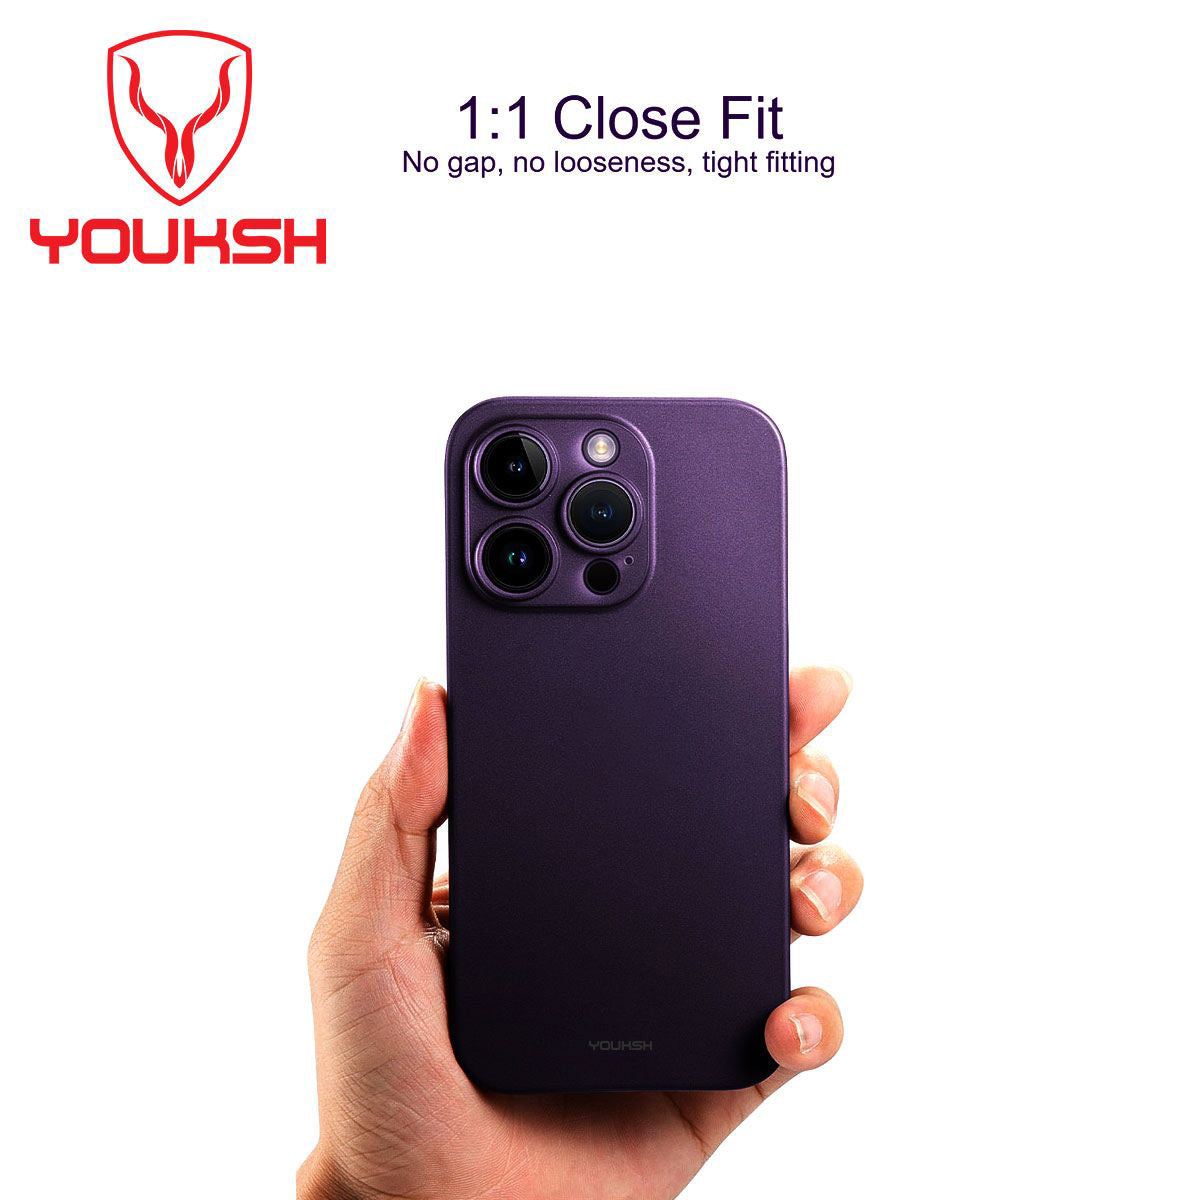 YOUKSH Apple Iphone 14 PRO Max Wing Case - Iphone 14 PRO Max Paper Case - Iphone 14 PRO Max (6.7) Ultra Thin Lightweight Back cover - Iphone 14 PRO Max Slim Smart Back Pouch - For Iphone 14 Series.(Deep Purple)